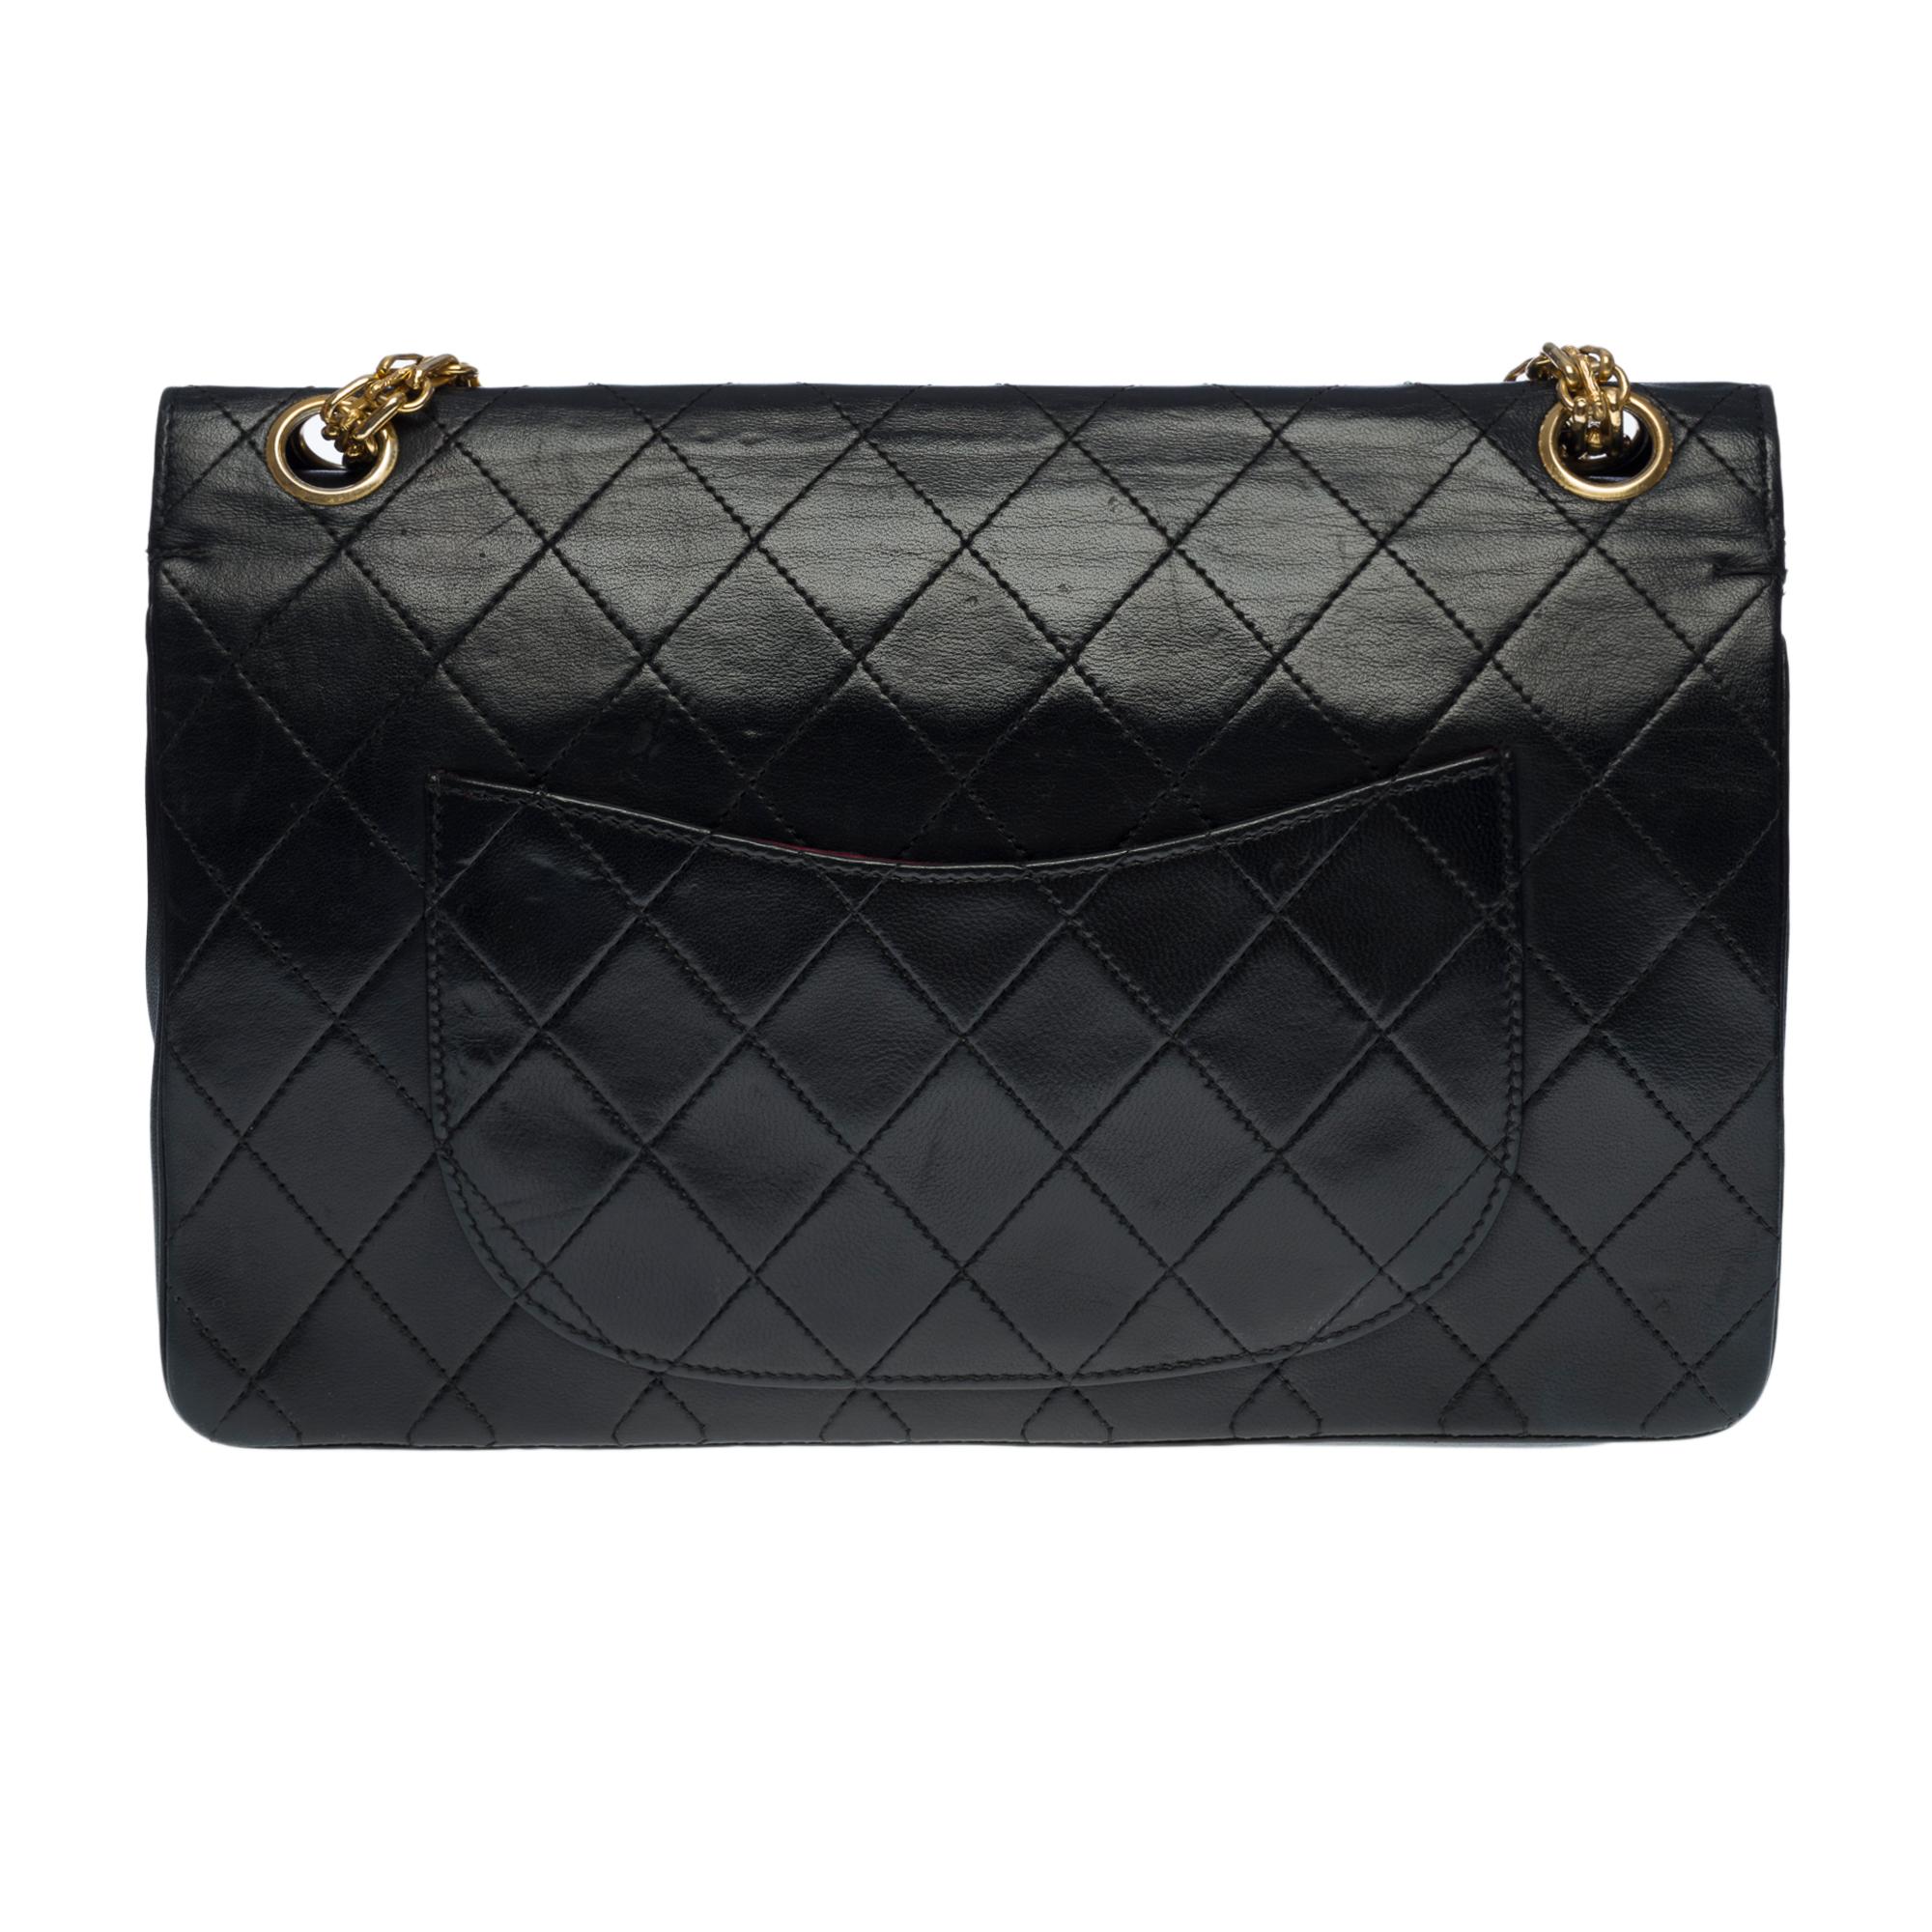 Sublime Chanel Timeless/Classic medium shoulder bag in black quilted lambskin leather, gold-tone metal hardware, a gold-tone metal chain Mademoiselle allowing a shoulder support
Backpack pocket
Flap closure, gold-plated CC Mademoiselle clasp
Double